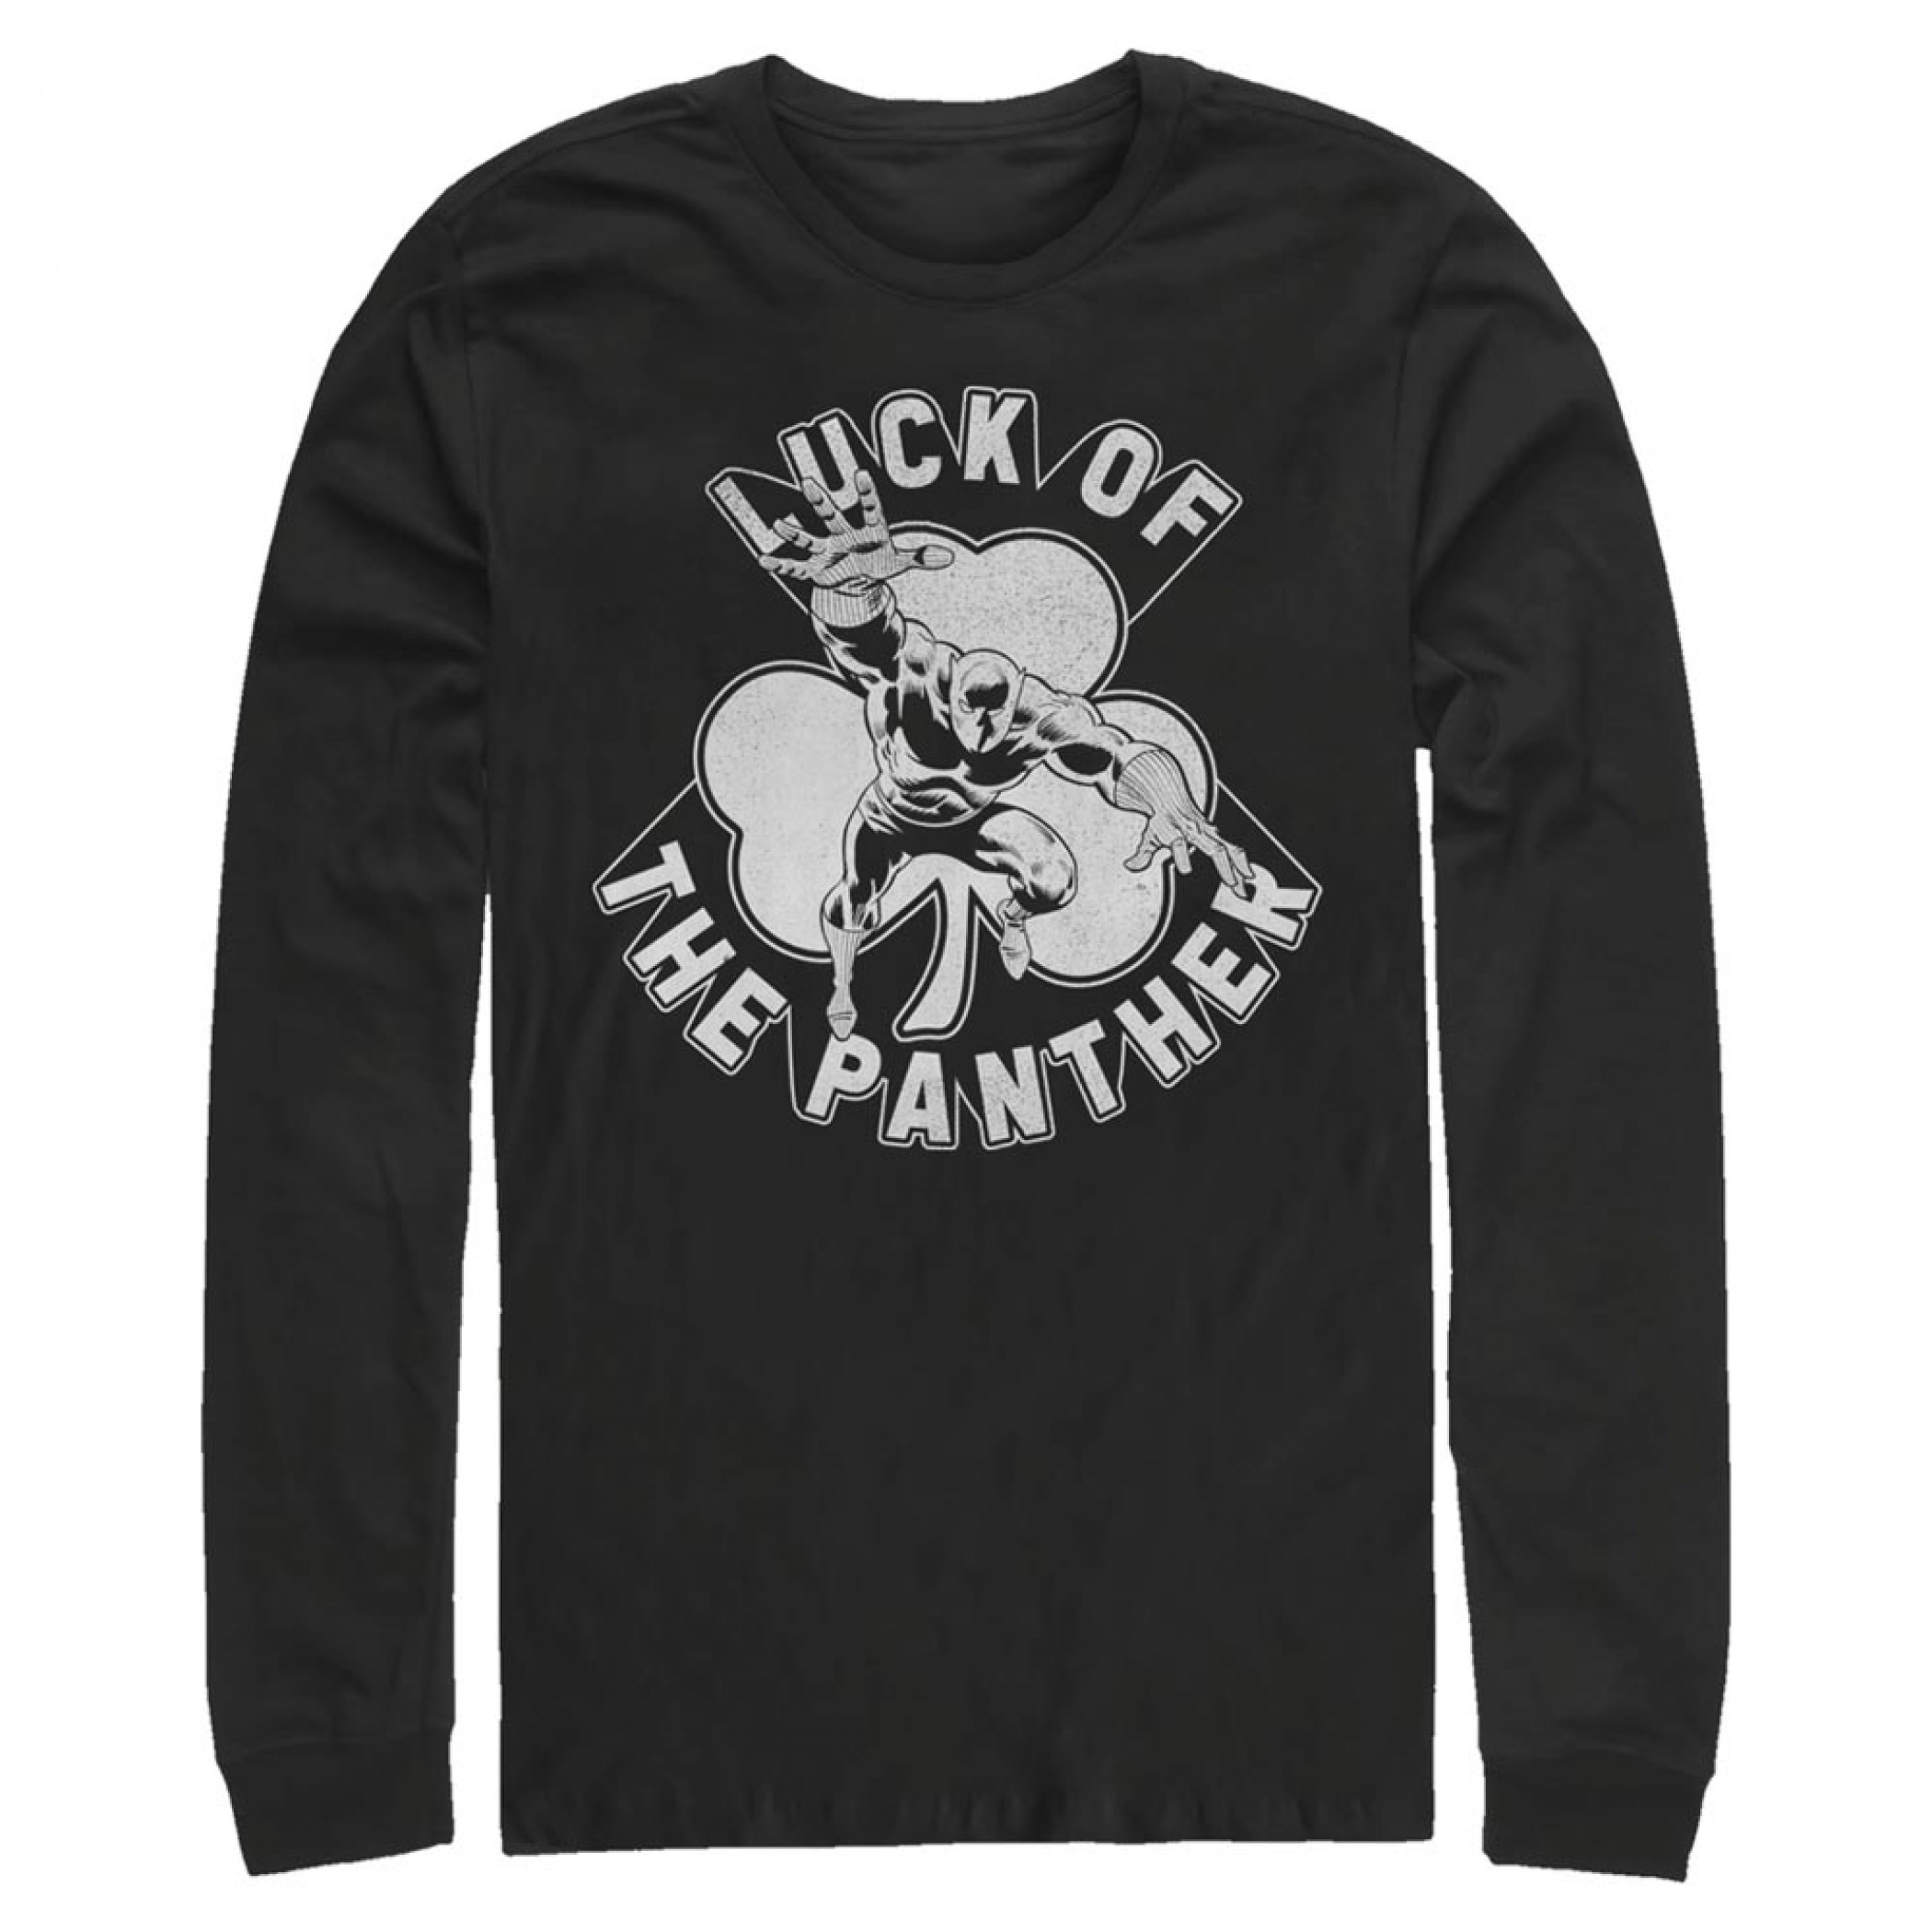 Luck of the Panther Black Long Sleeve Shirt